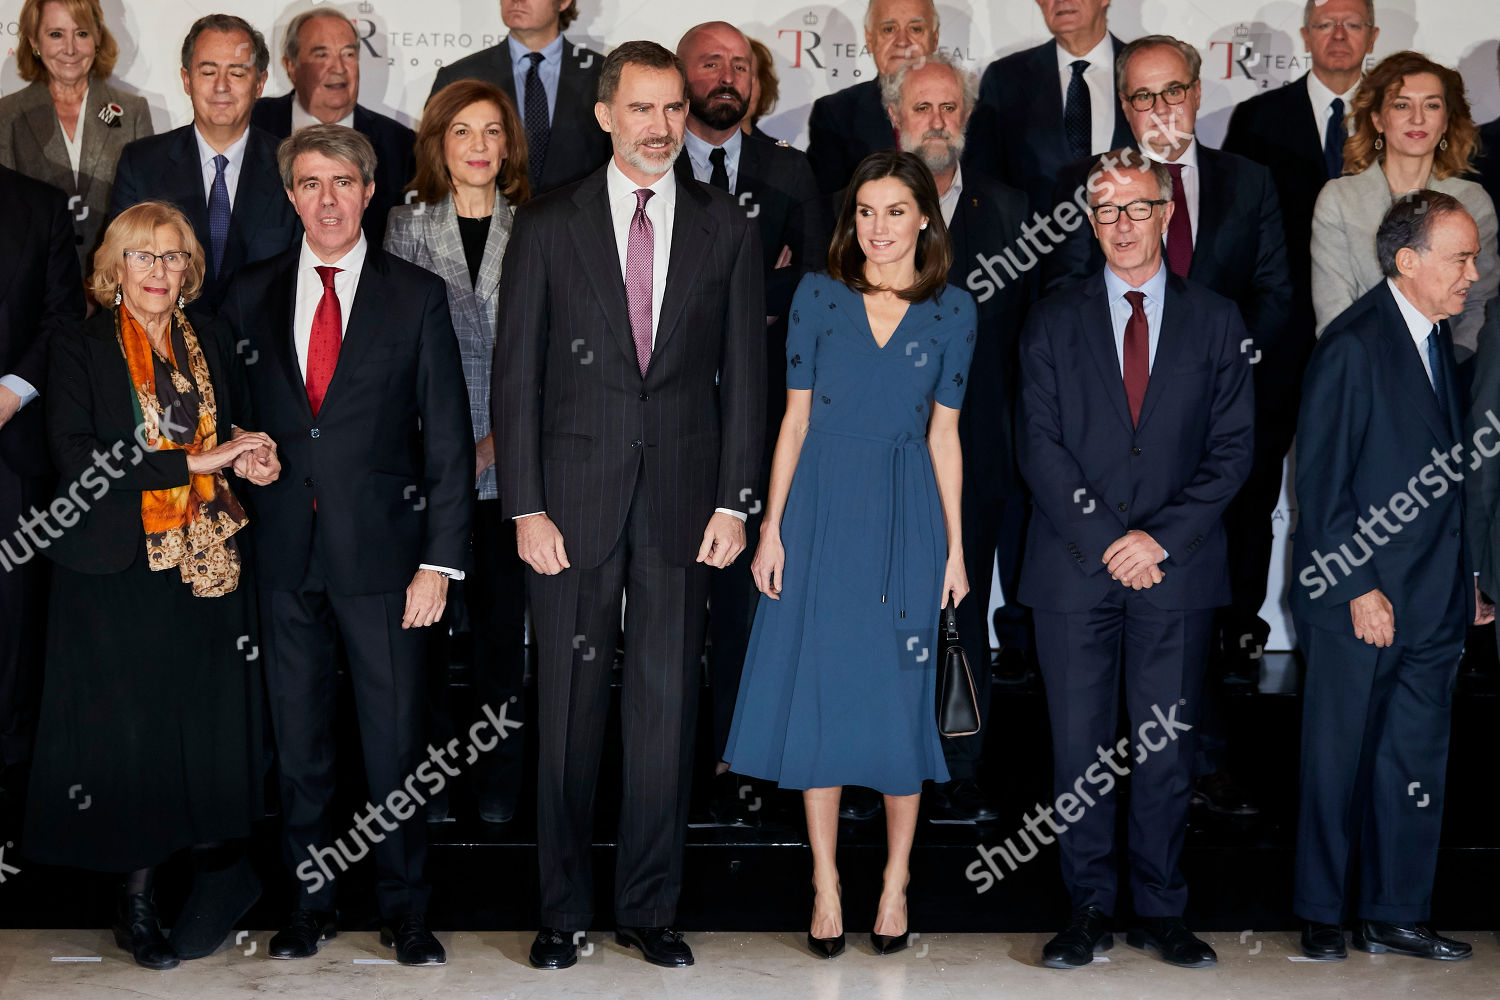 meeting-of-the-board-of-trustees-of-the-teatro-real-foundation-madrid-spain-shutterstock-editorial-10096414b.jpg